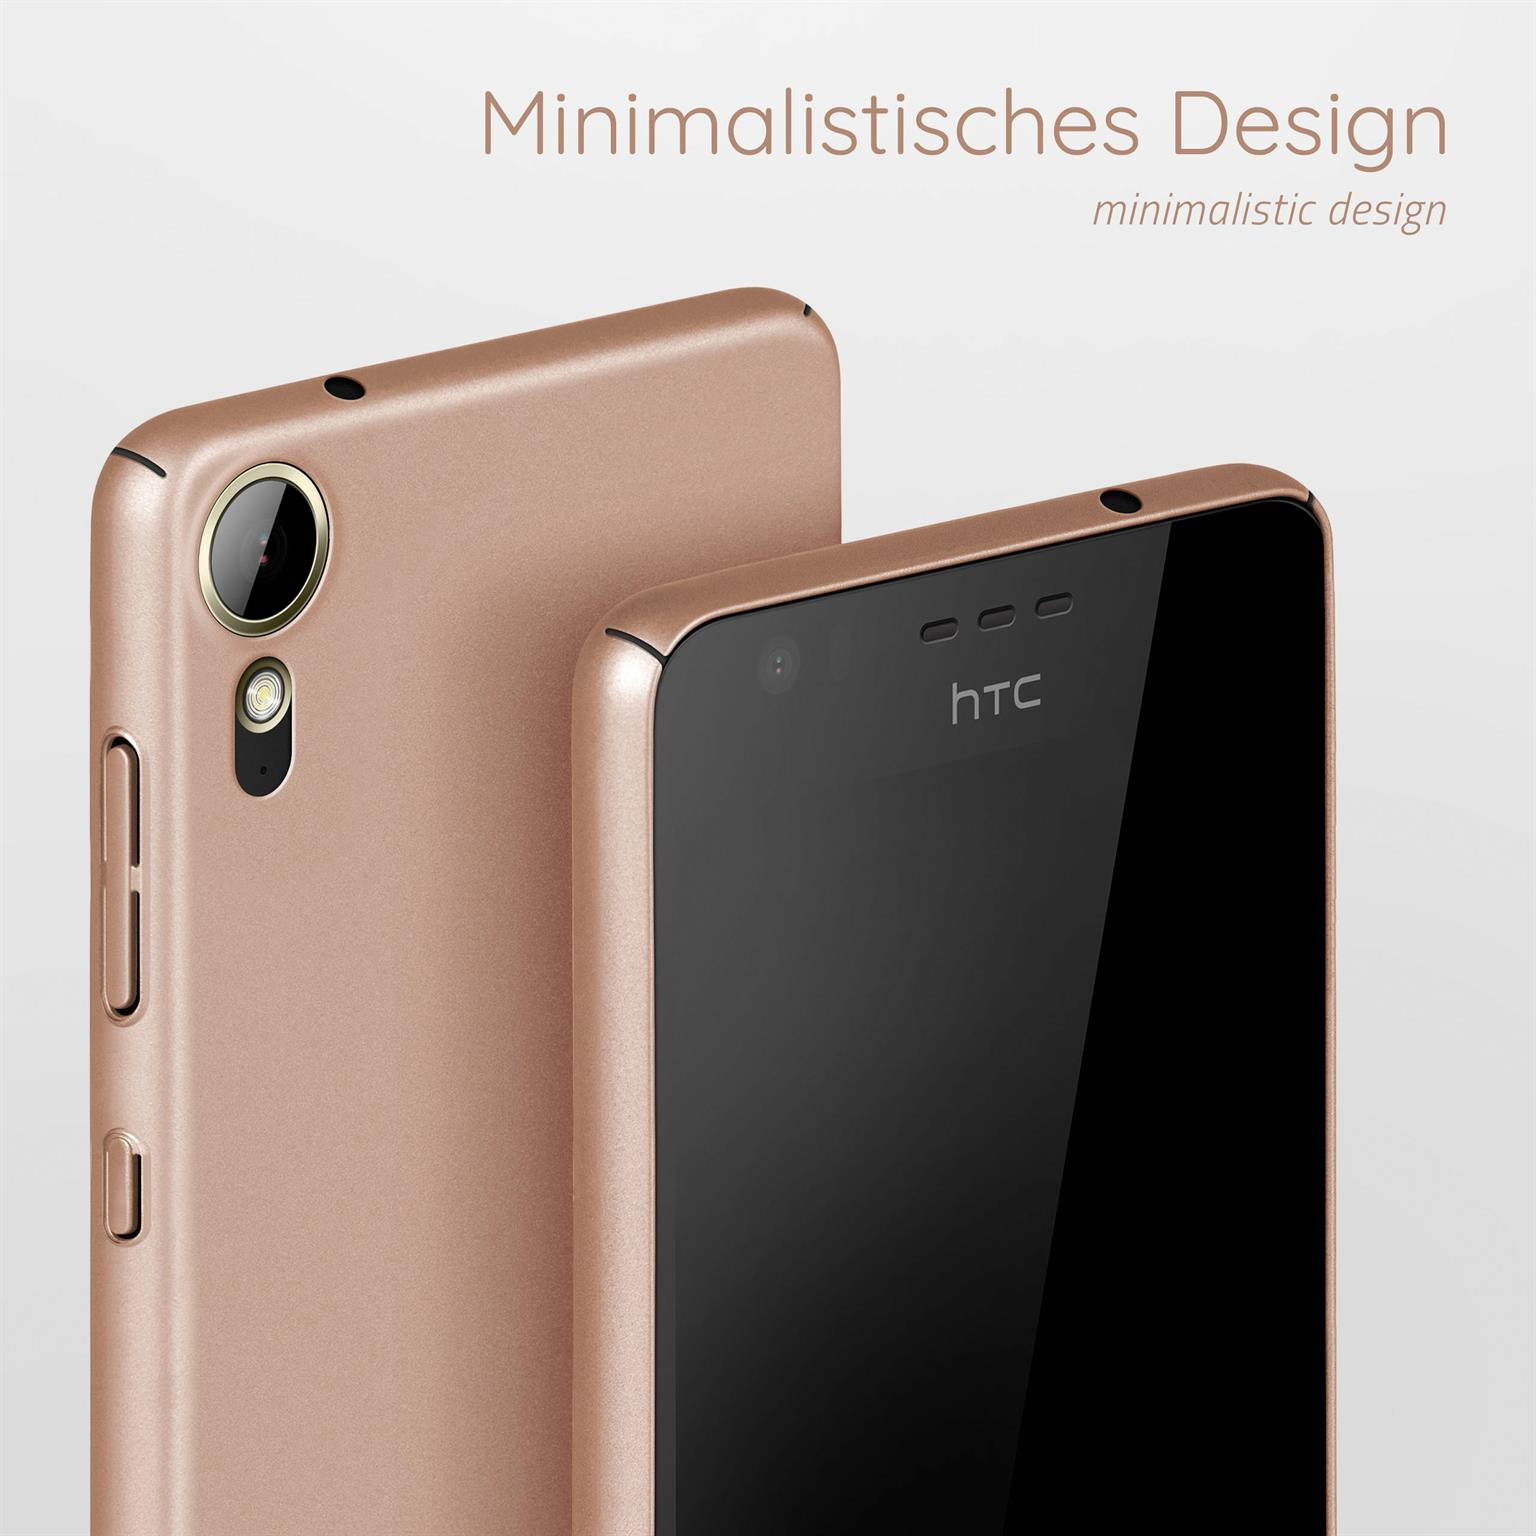 MOEX Alpha Lifestyle, HTC, Backcover, Desire Gold 10 Case